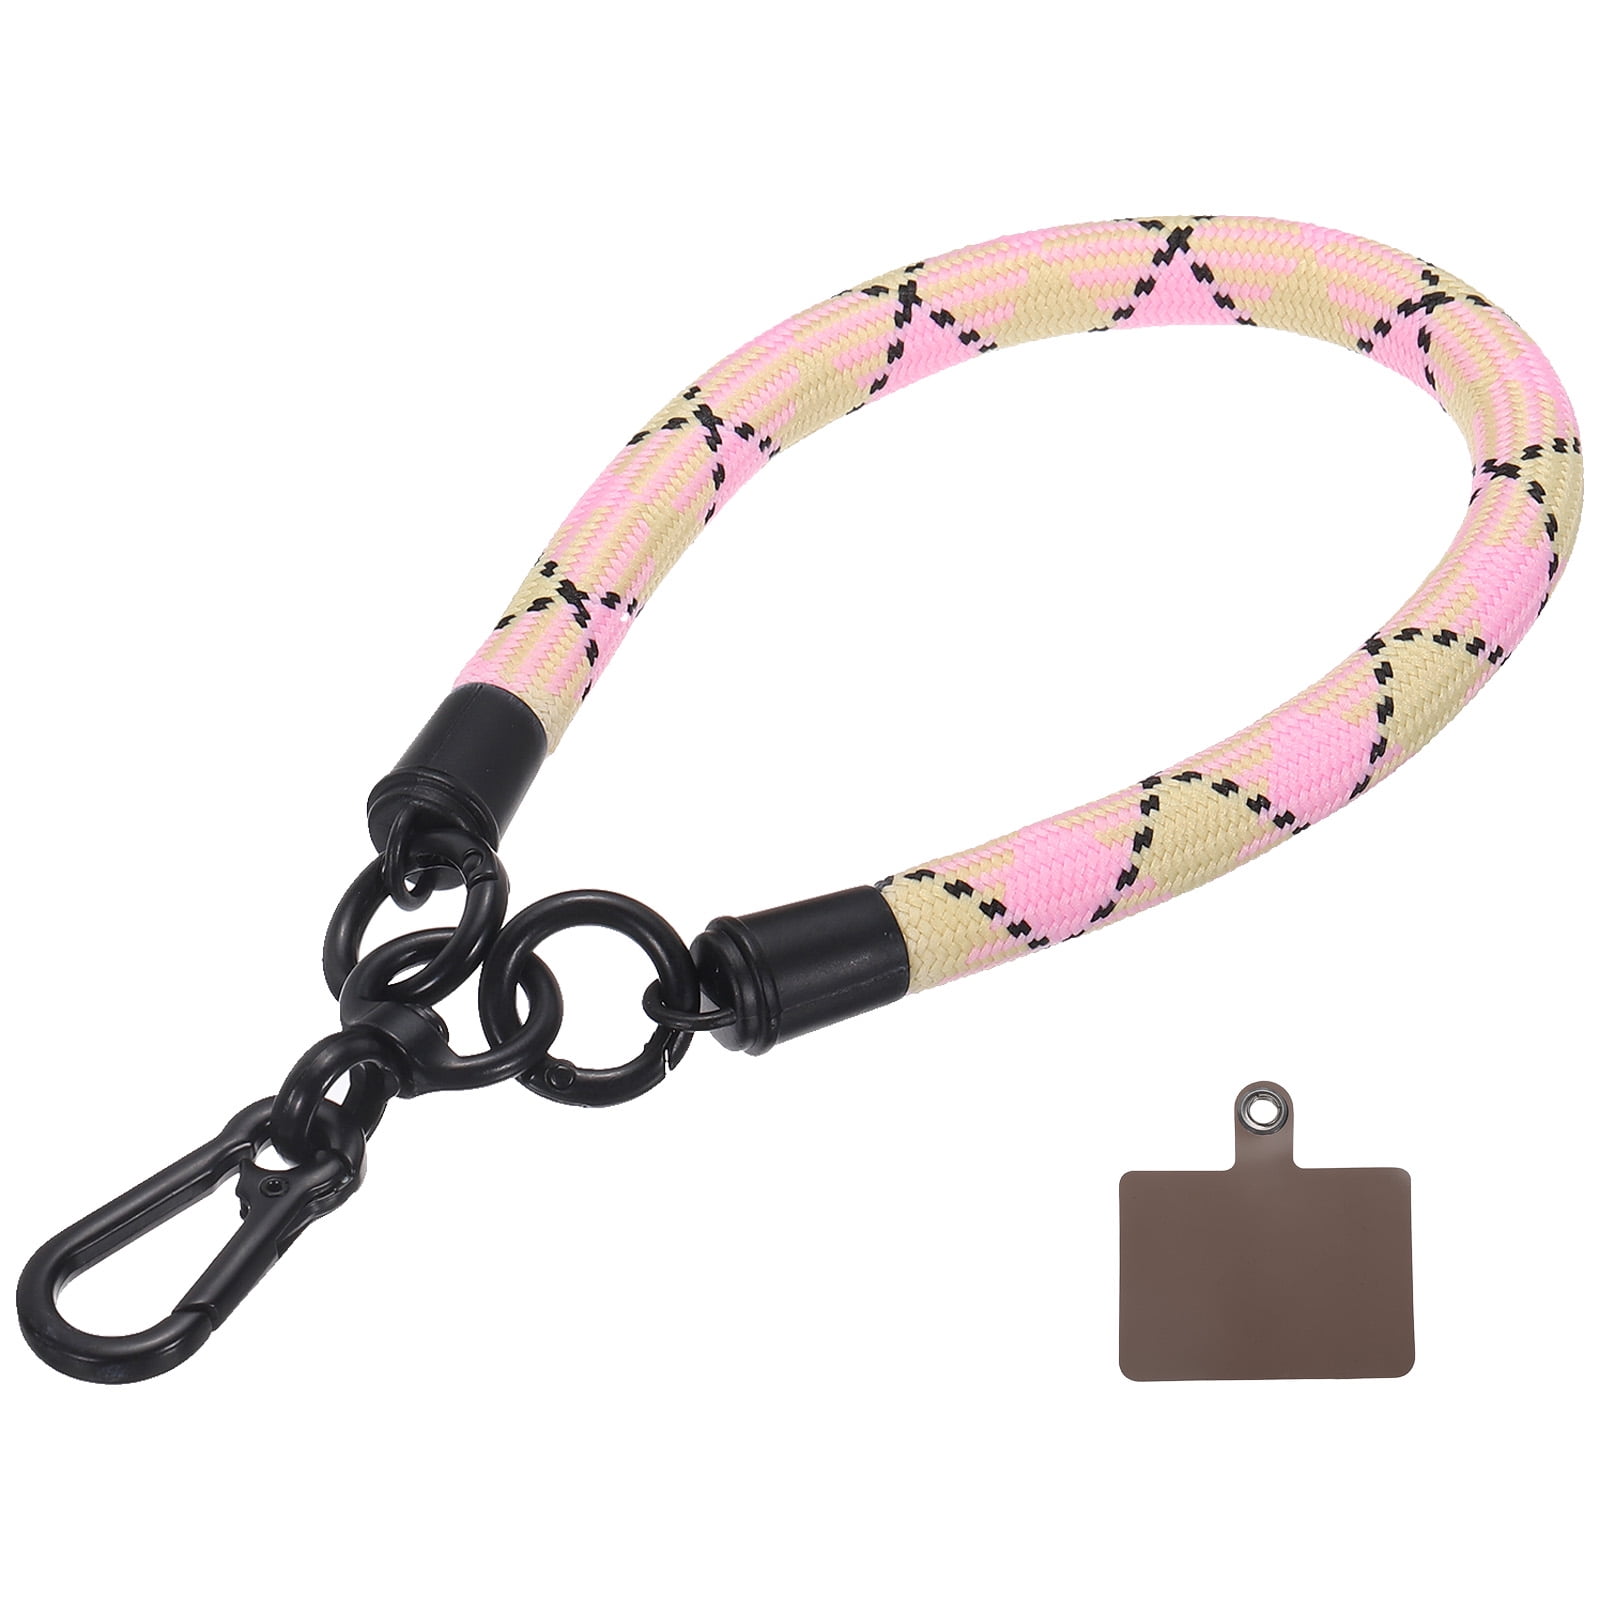 Unique Bargains Uxcell Phone Lanyard Adjustable Neck Lanyard Wrist Lanyard With Lanyard Patch For Smartphone Pink Apricot Coffee 1 Pack